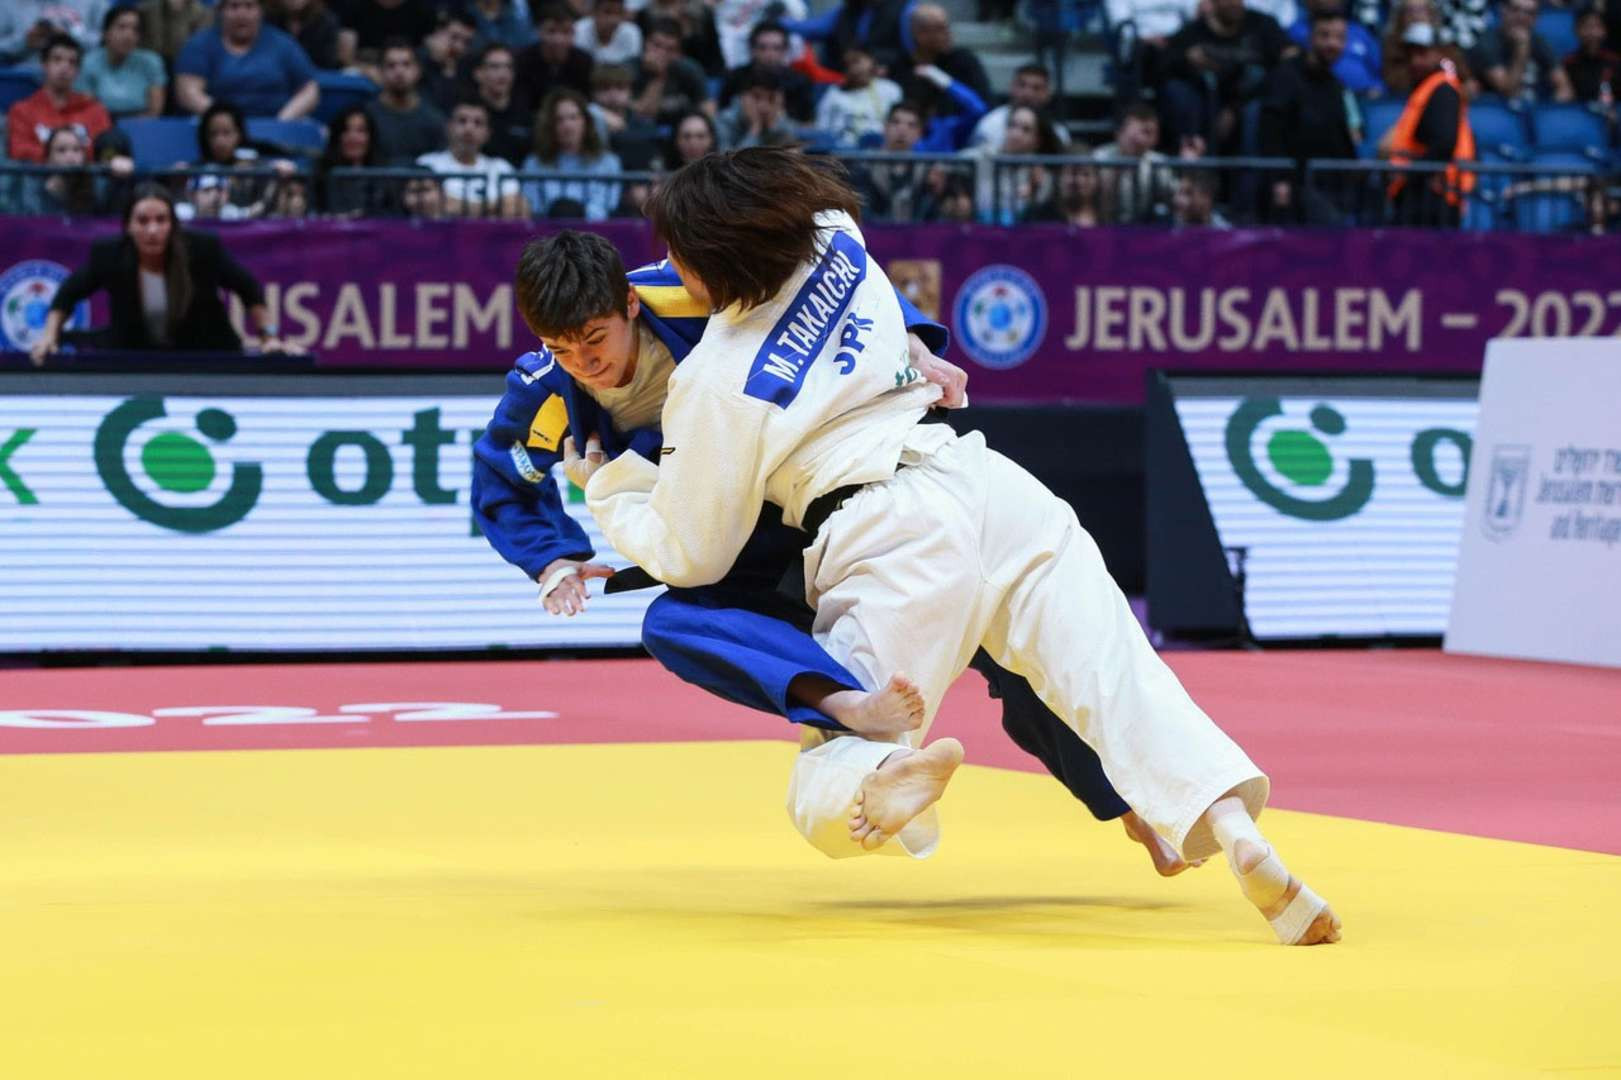 Miku Takaichi landed the ippon in the women's under-63kg final ©IJF